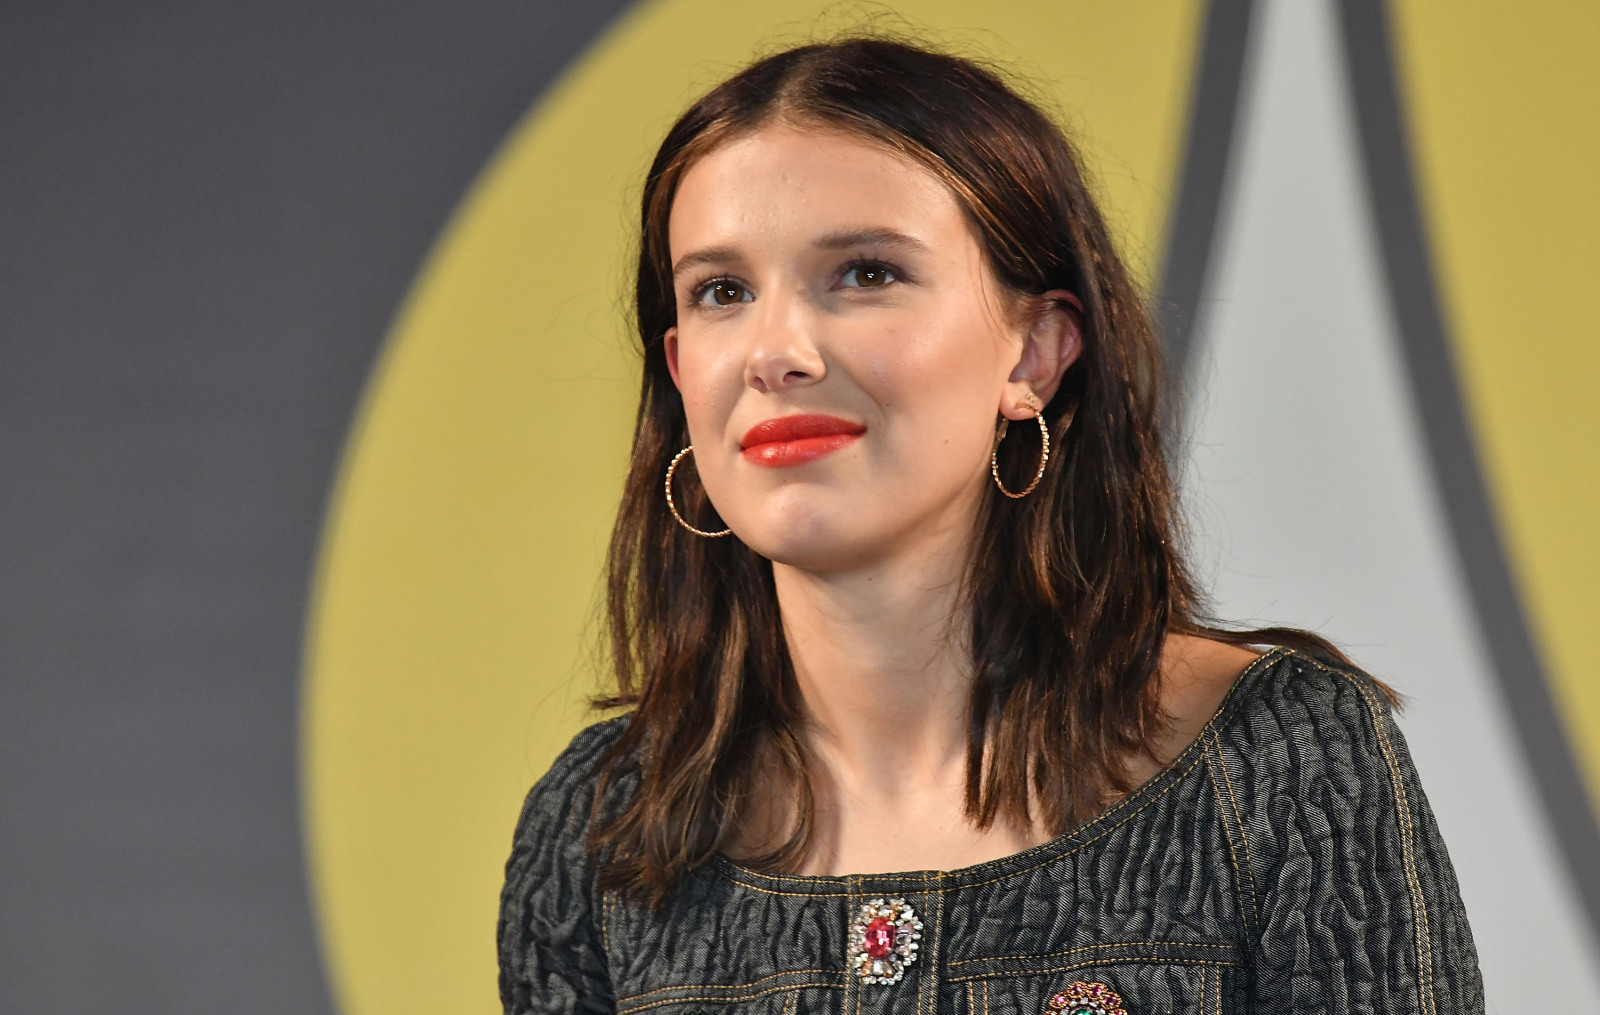 Millie Bobby Brown is ready for 'Stranger Things' to end: 'Goodbye